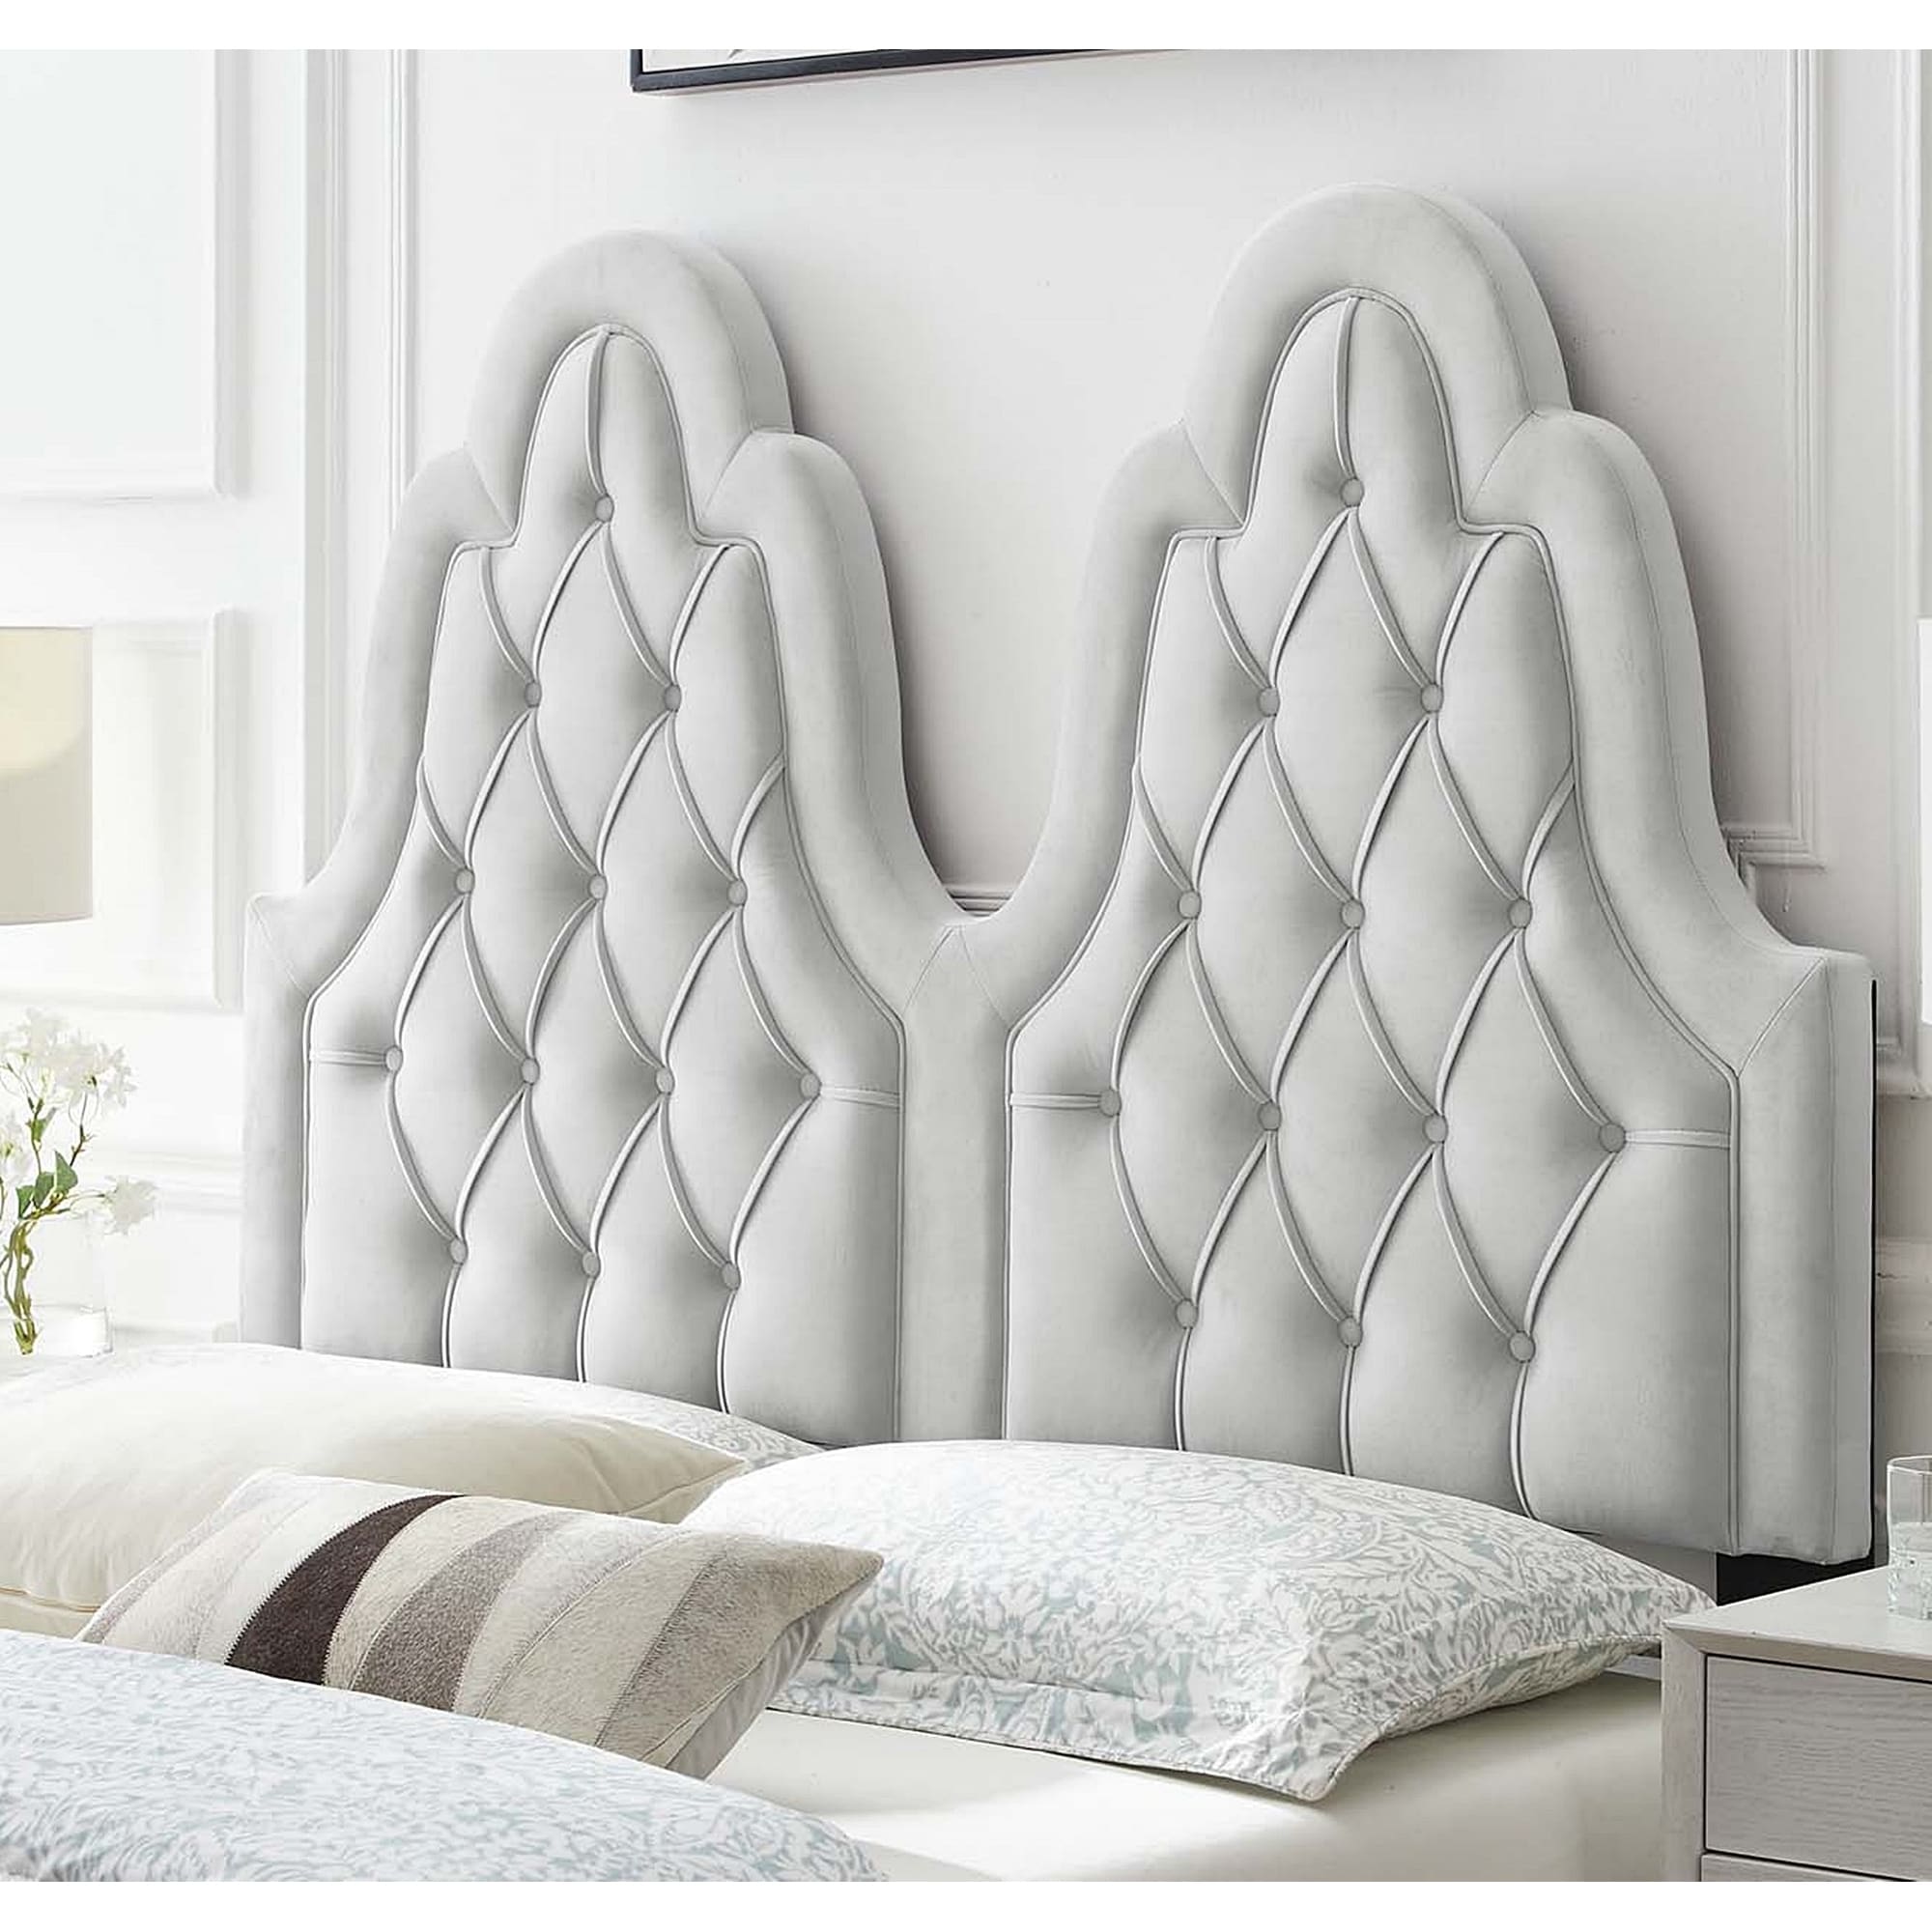 High Arched Button-Tufted Upholstered Fabric Twin Size Headboard in Ivory 